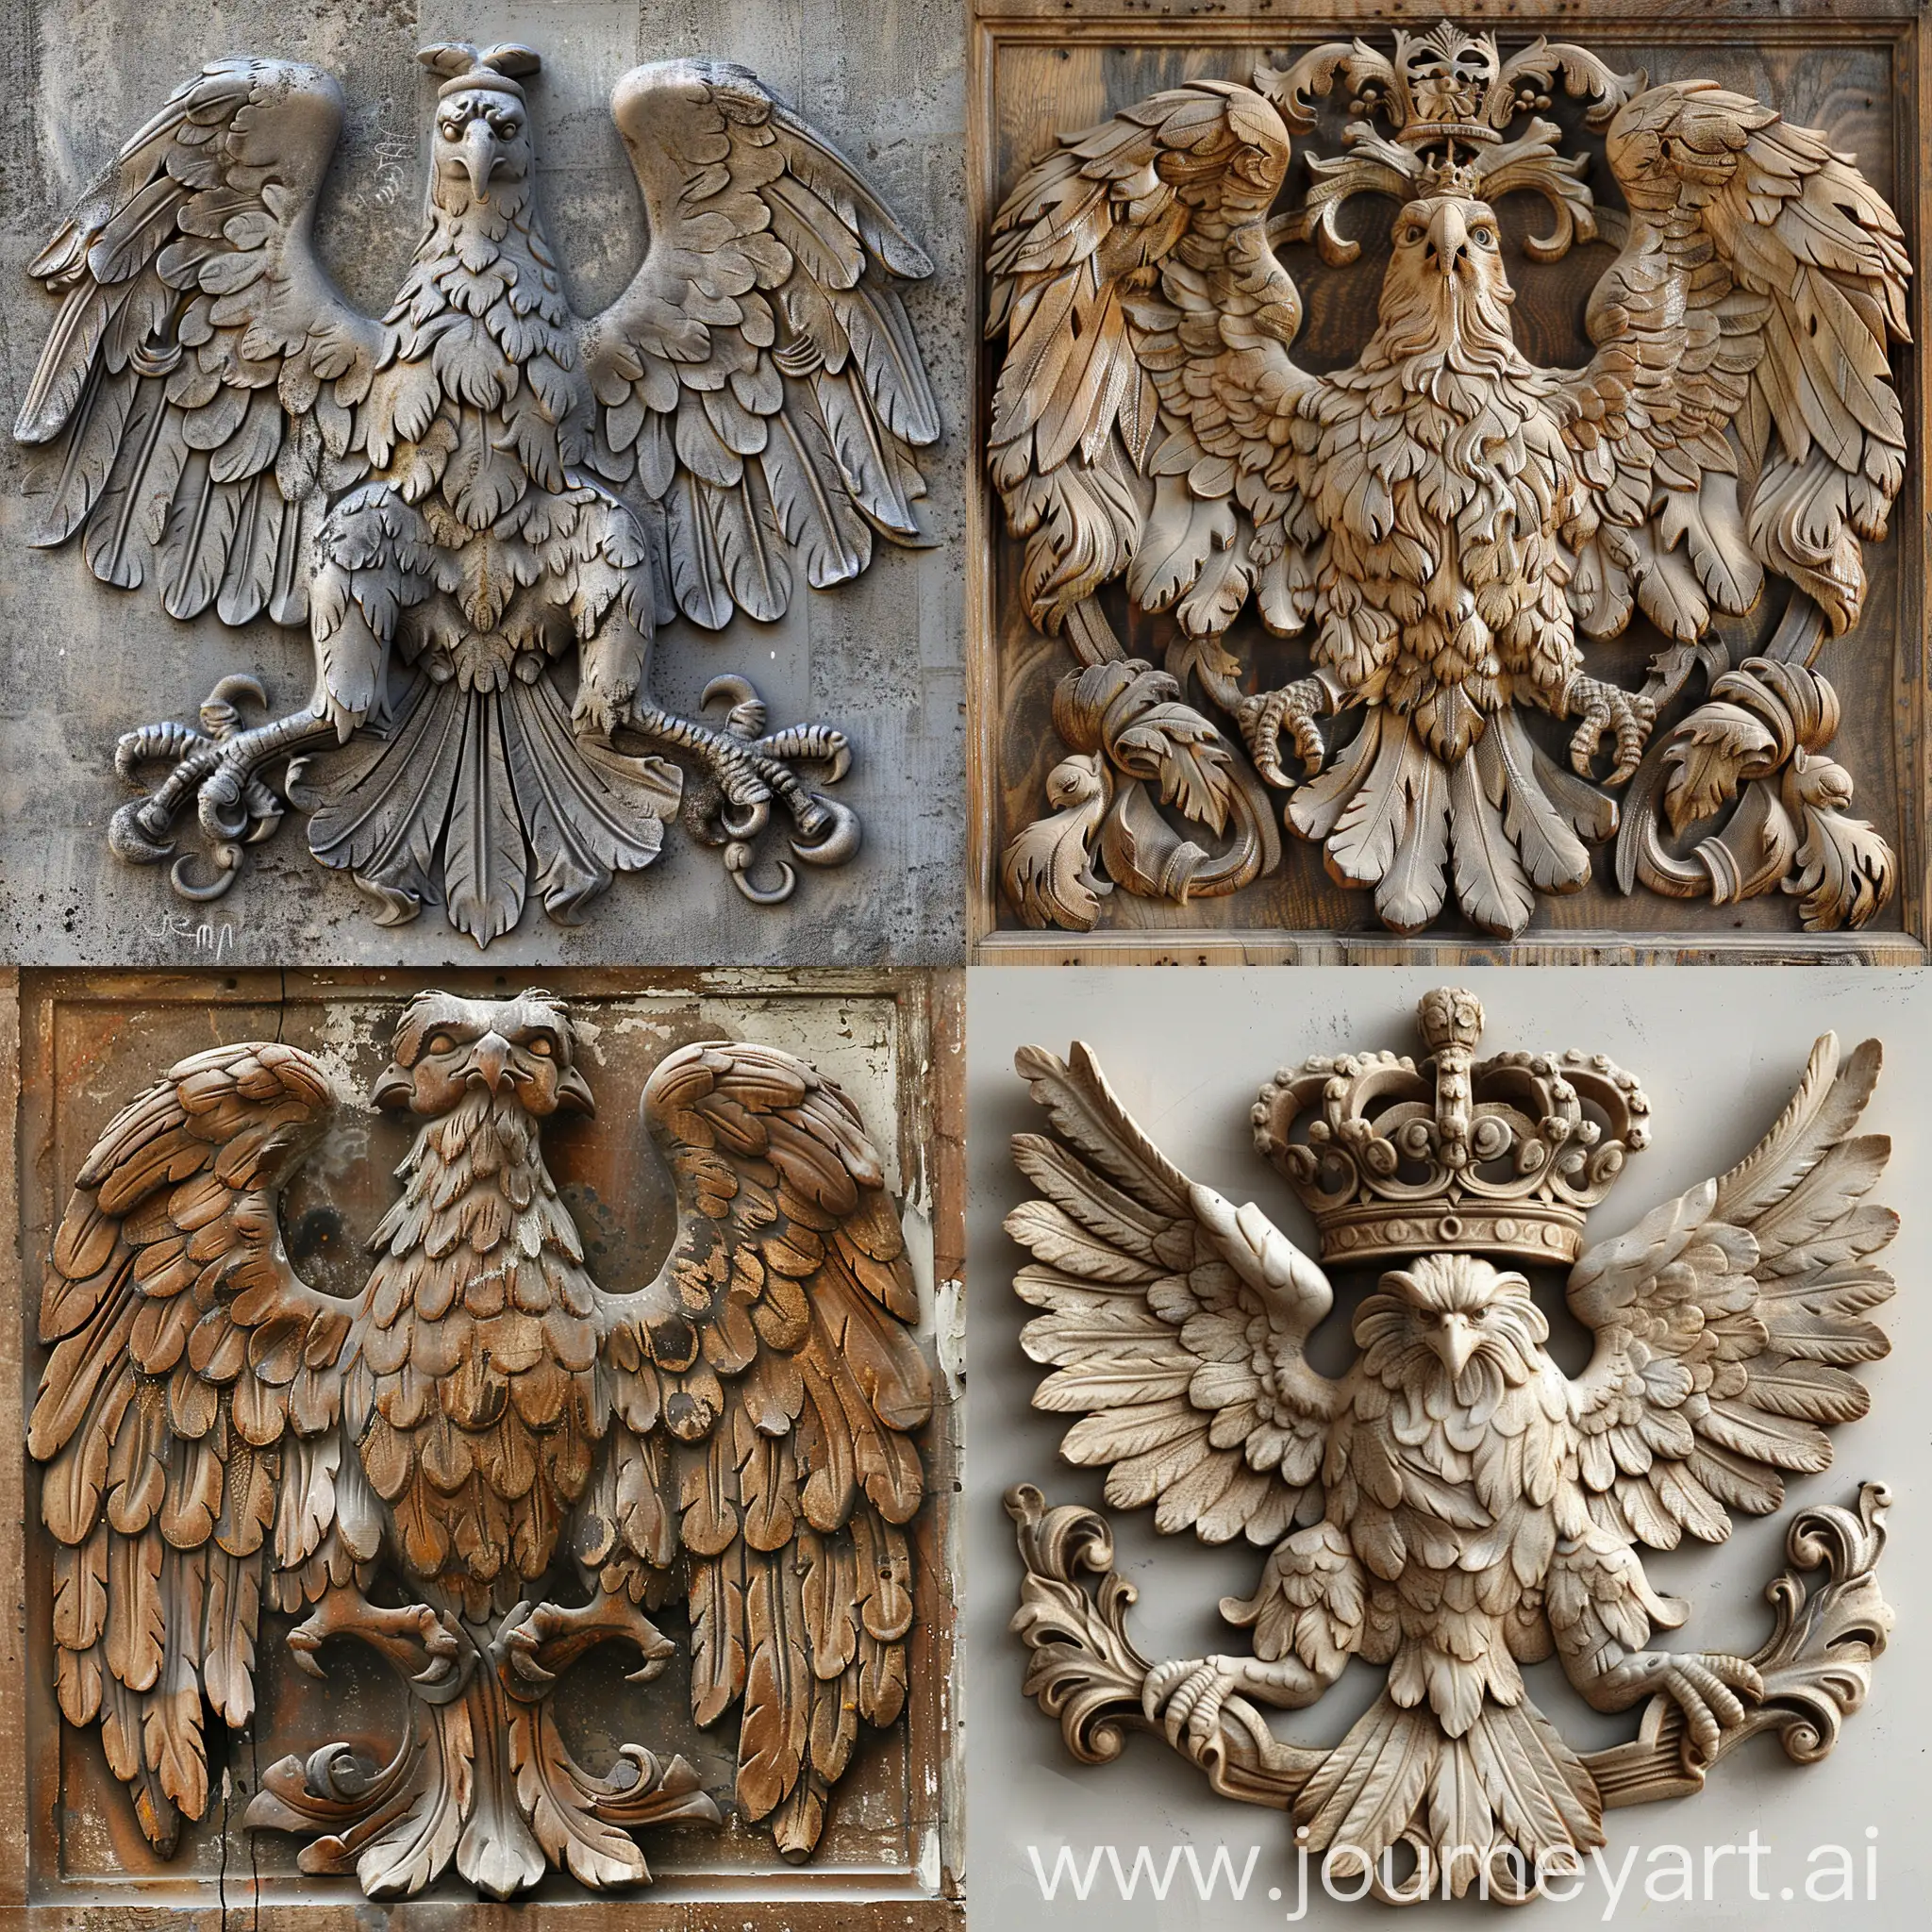 Coat-of-Arms-with-Double-Headed-Eagle-Relief